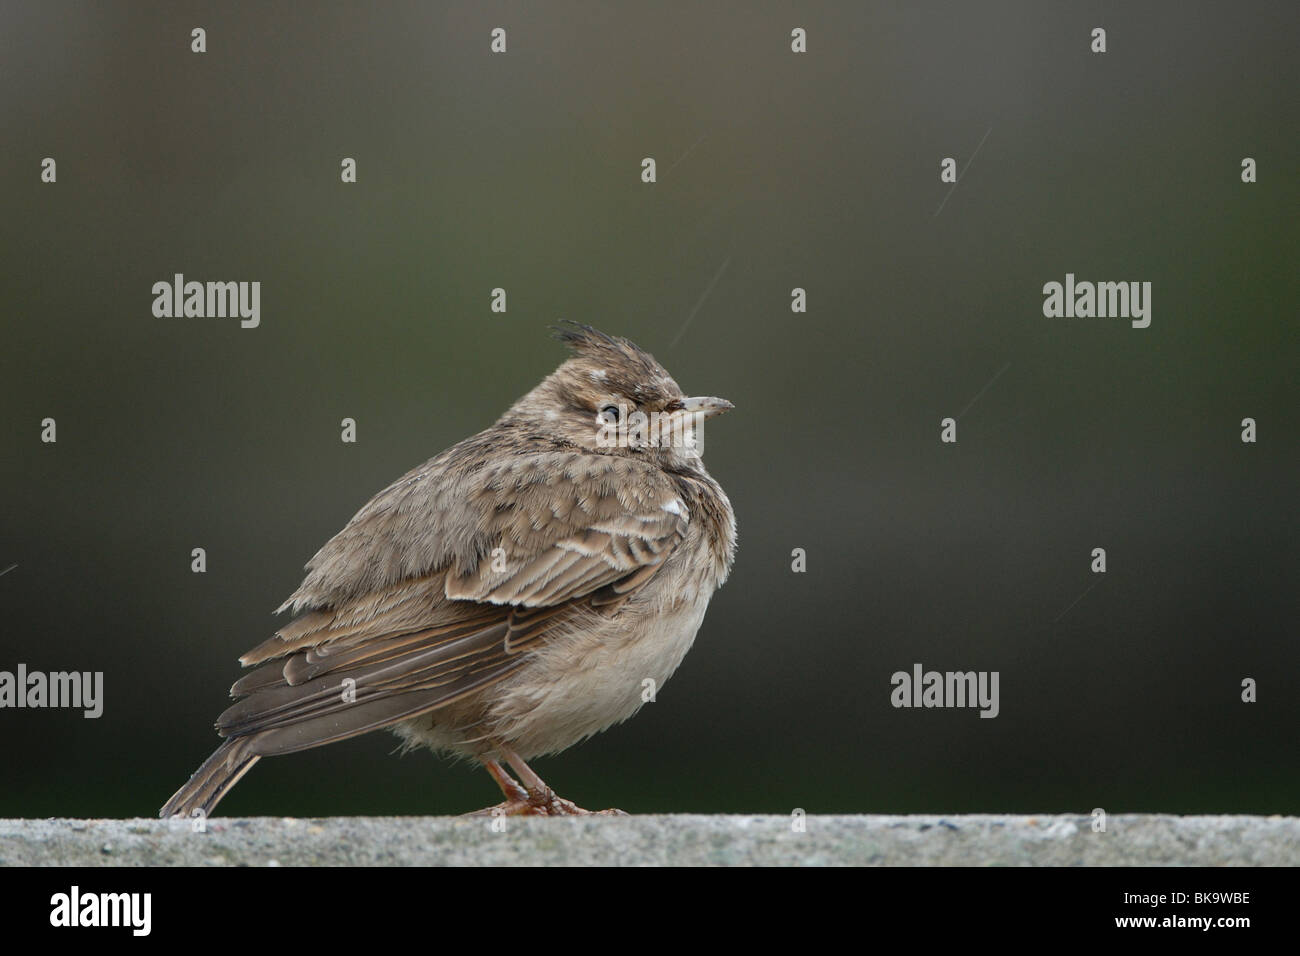 Crested lark sitting on concrete in the rain Stock Photo